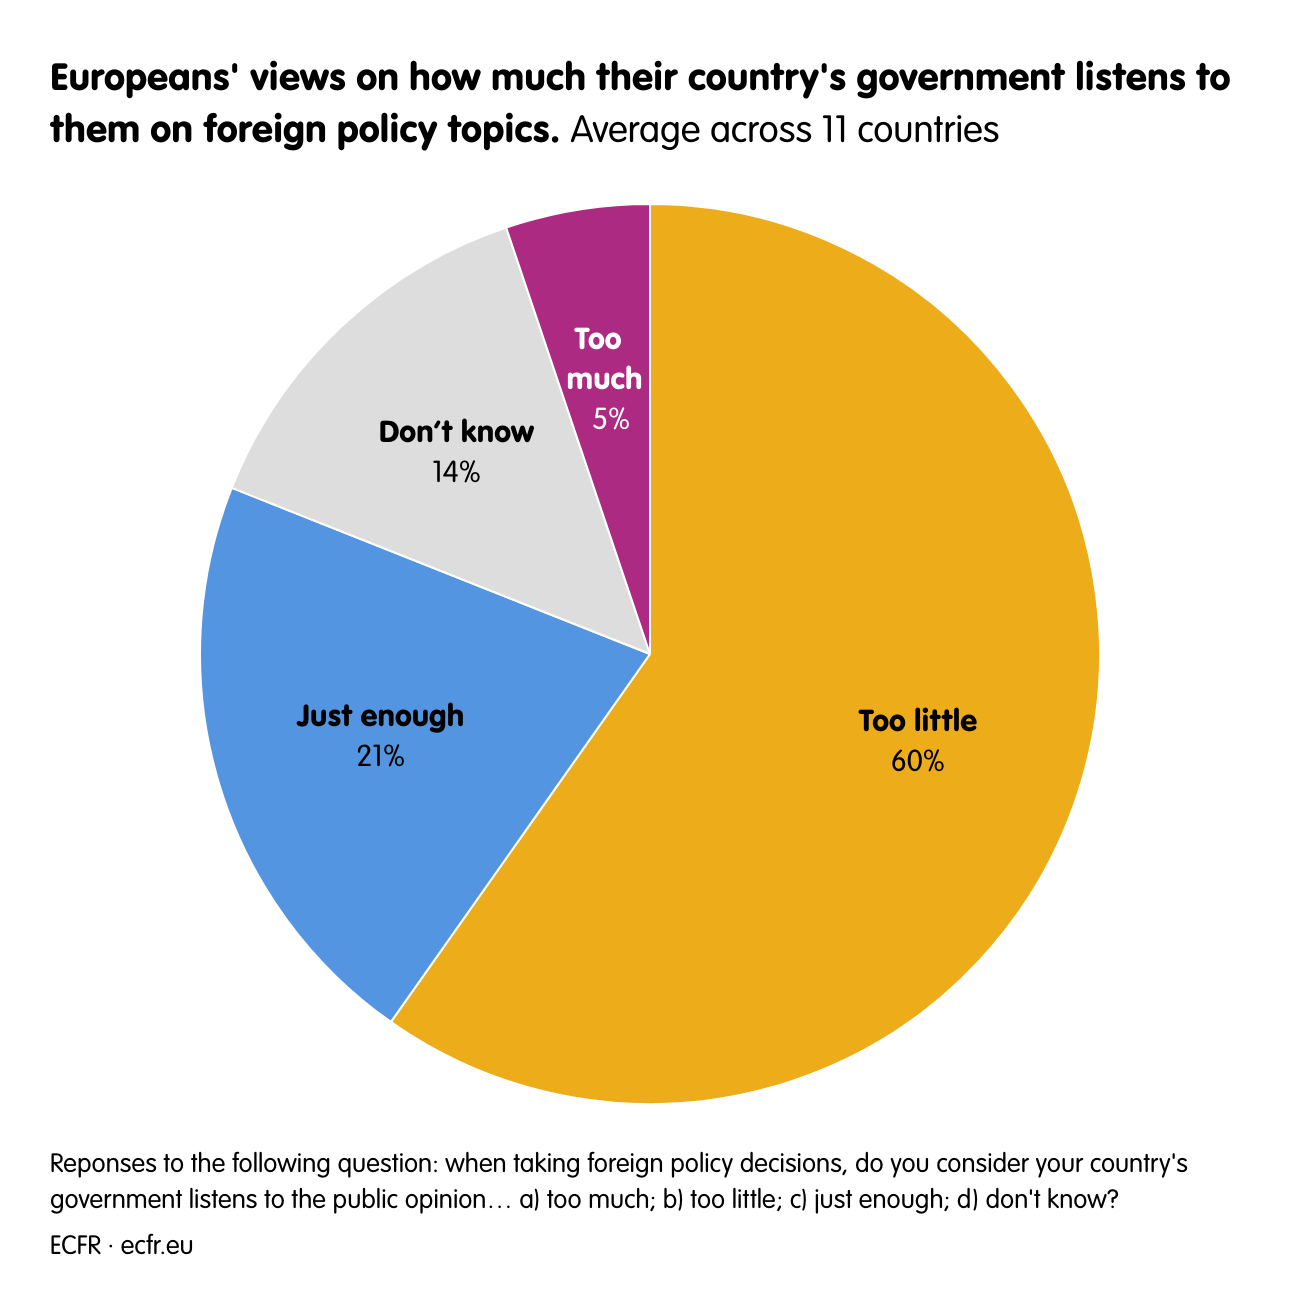 Europeans' views on how much their country's government listens to them on foreign policy topics.